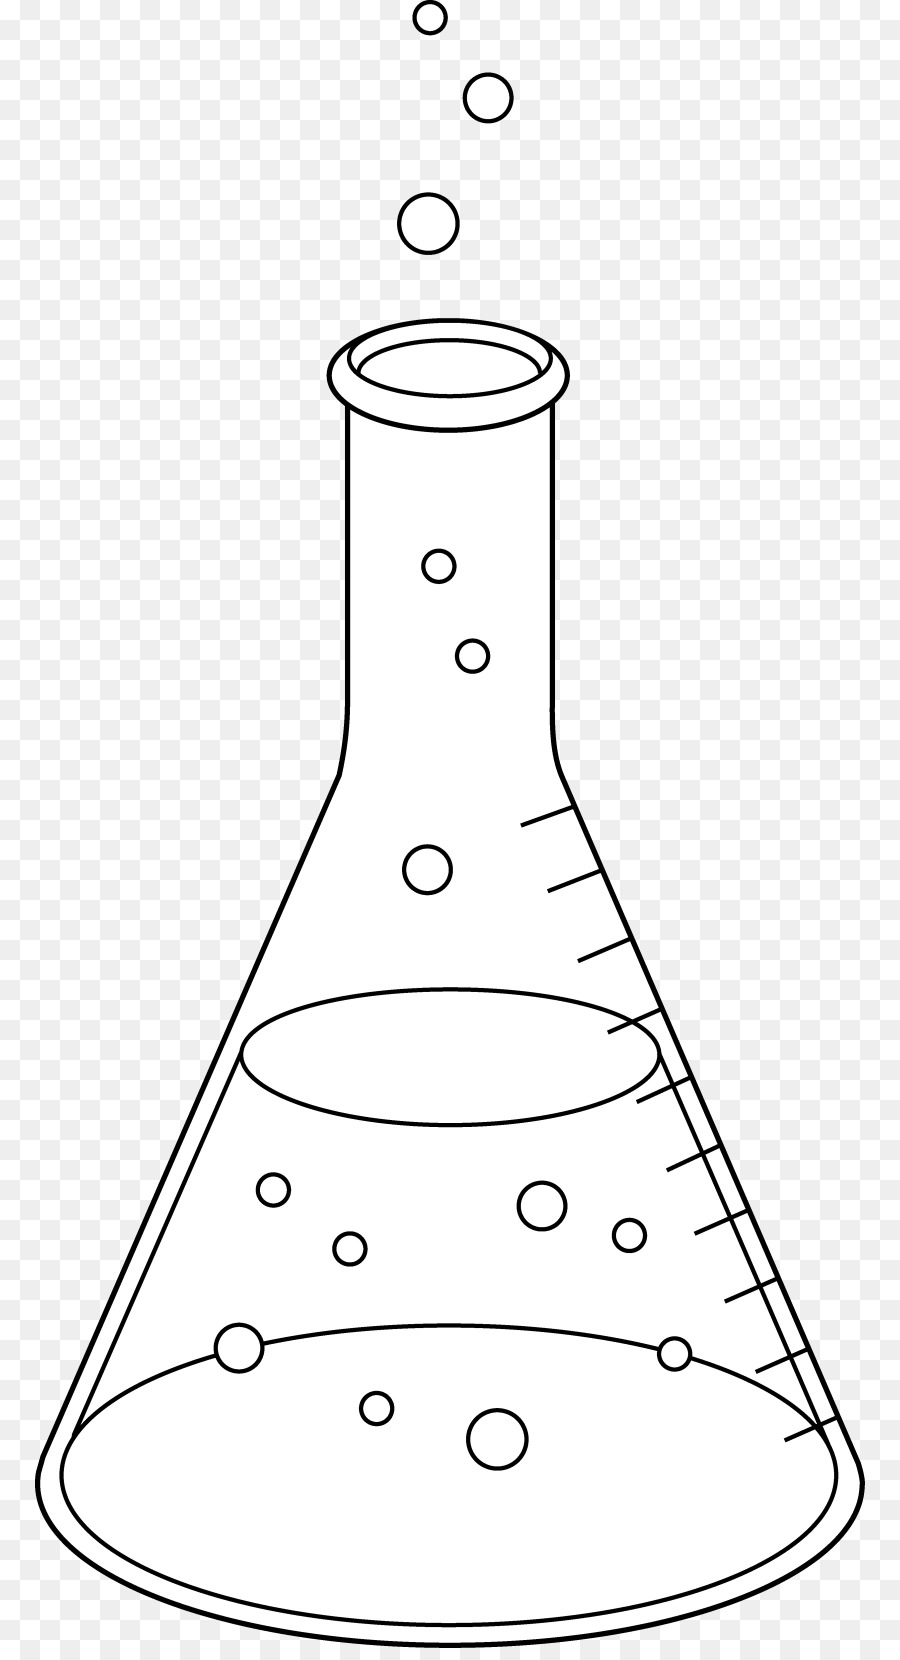 Beaker clipart black and white. Book science drawing 